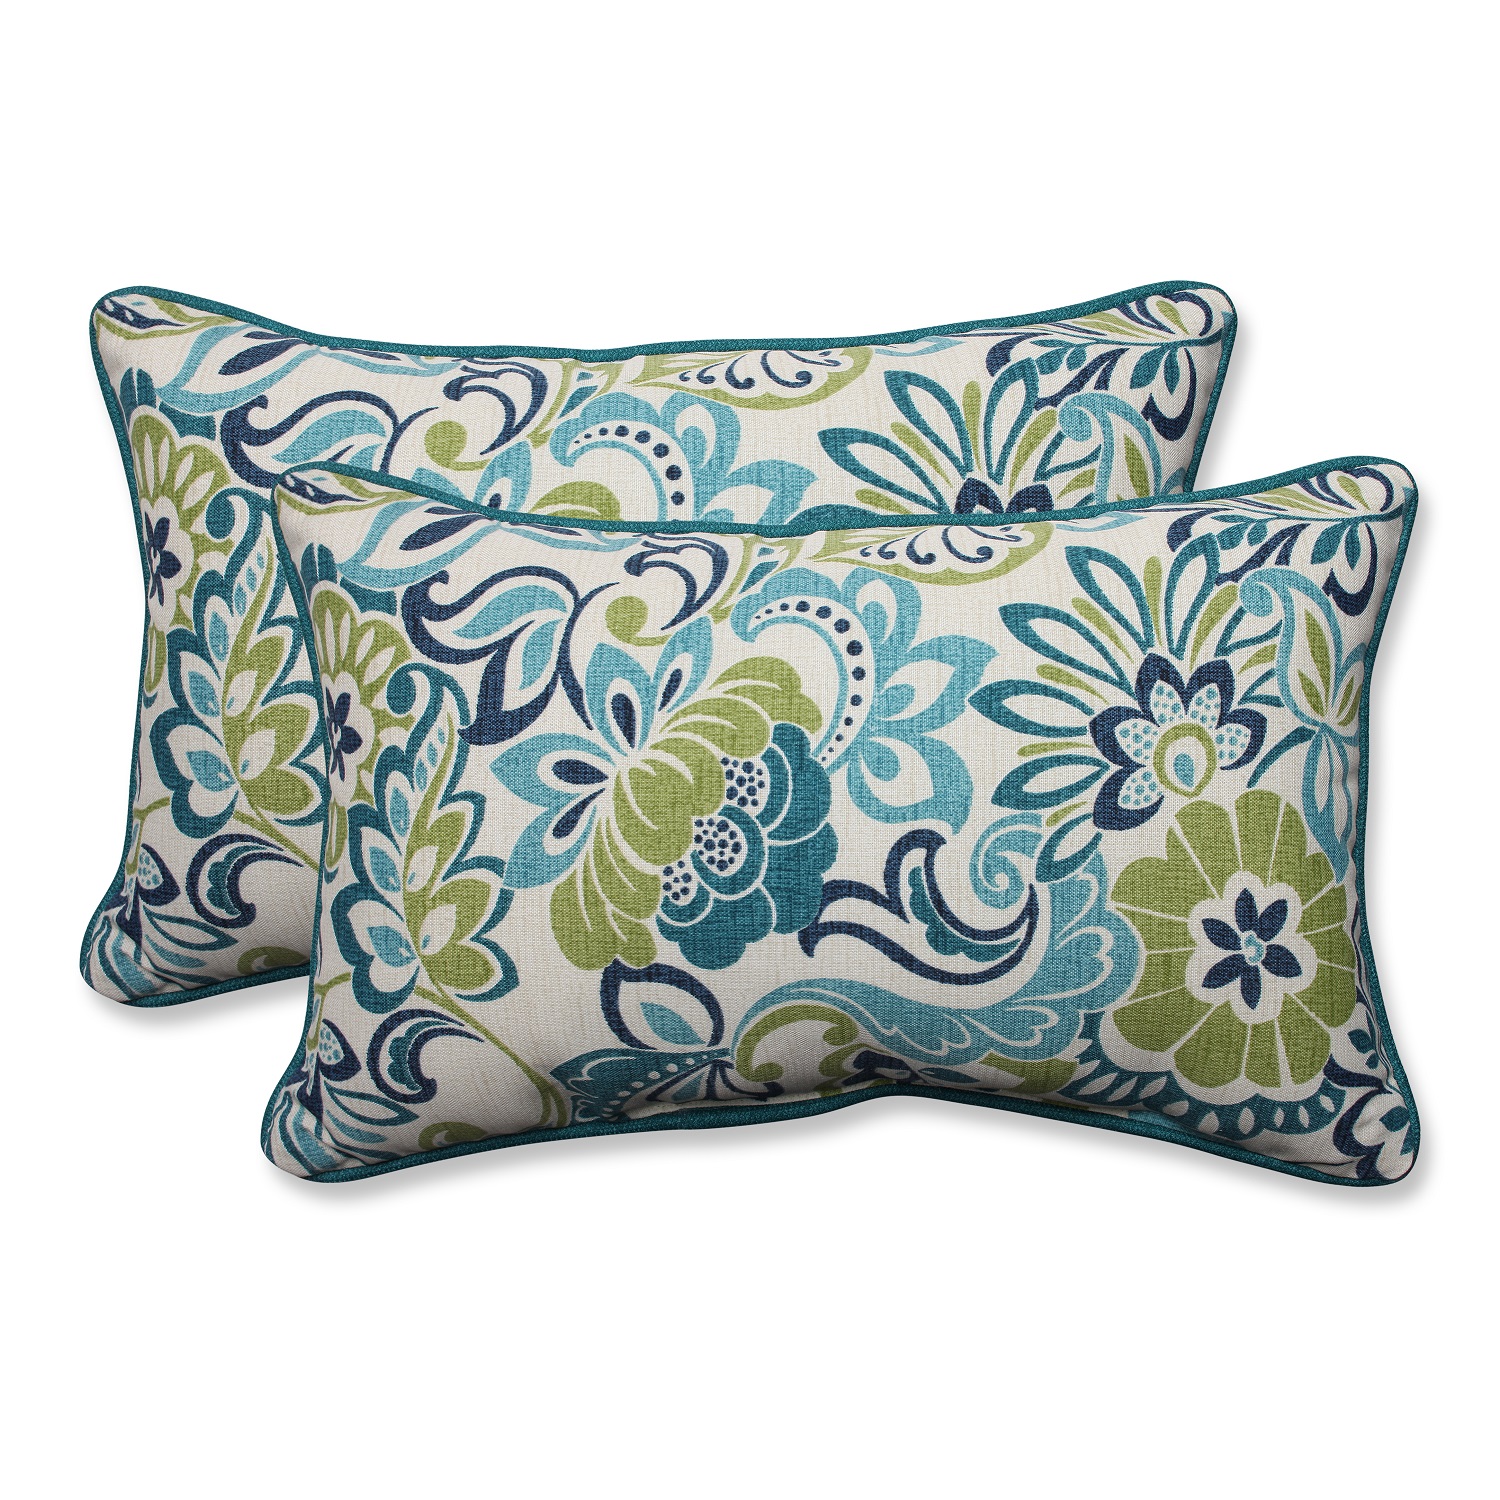 CC Outdoor Living Set of 2 Blue and Green Infinity Flower Outdoor Corded Throw Pillows 18.5"